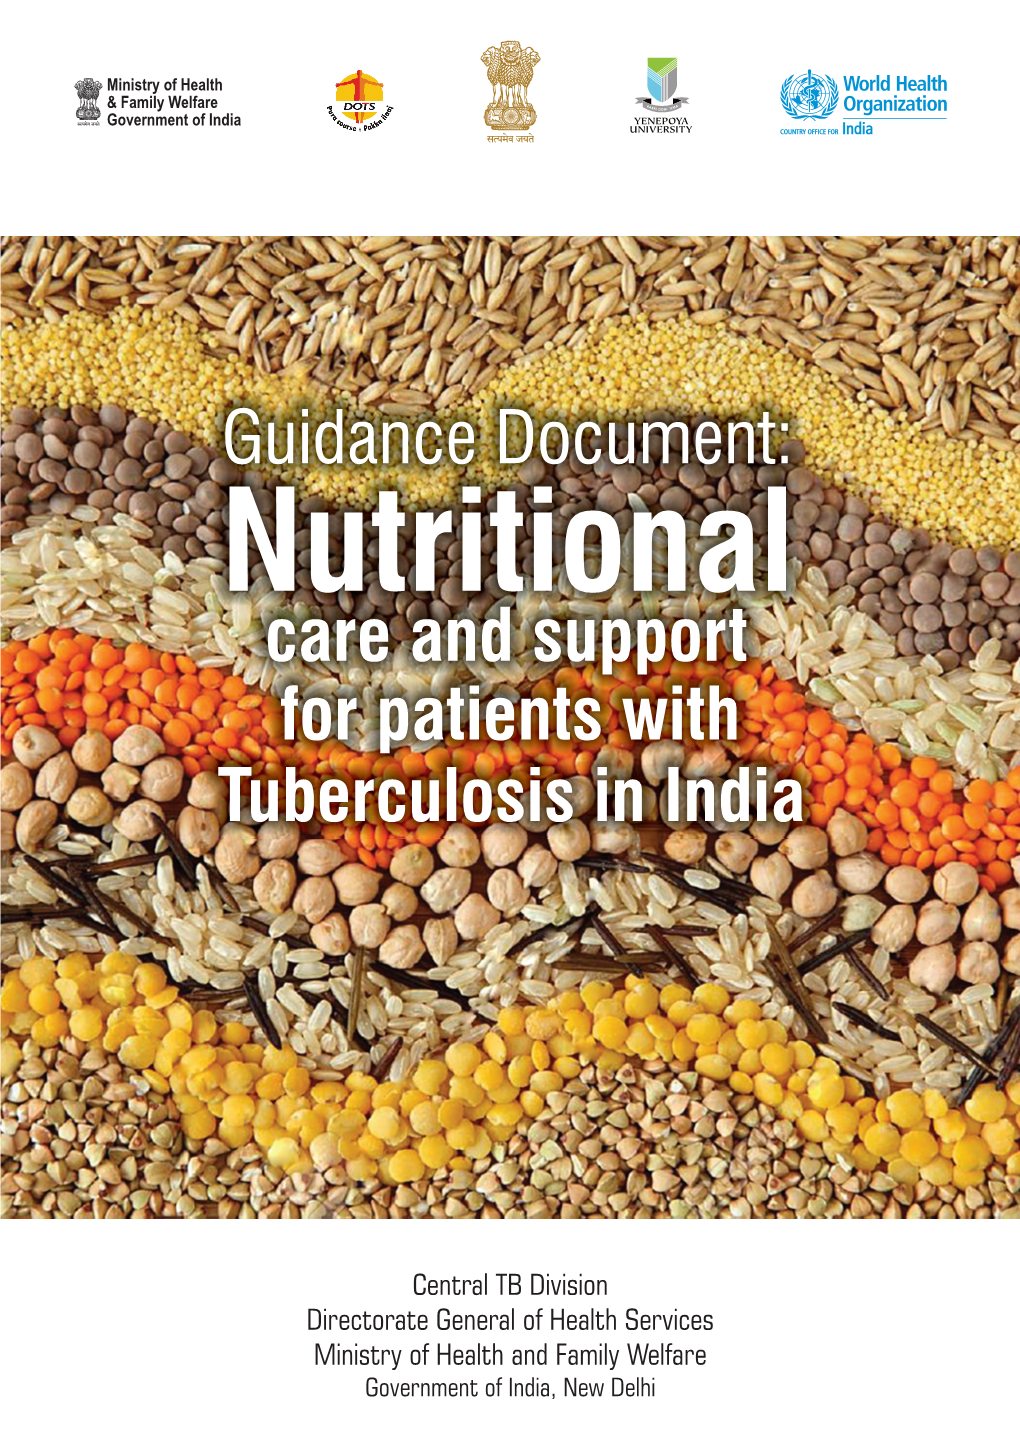 Guidance Document for Nutritional Care and Support for TB Patients in India